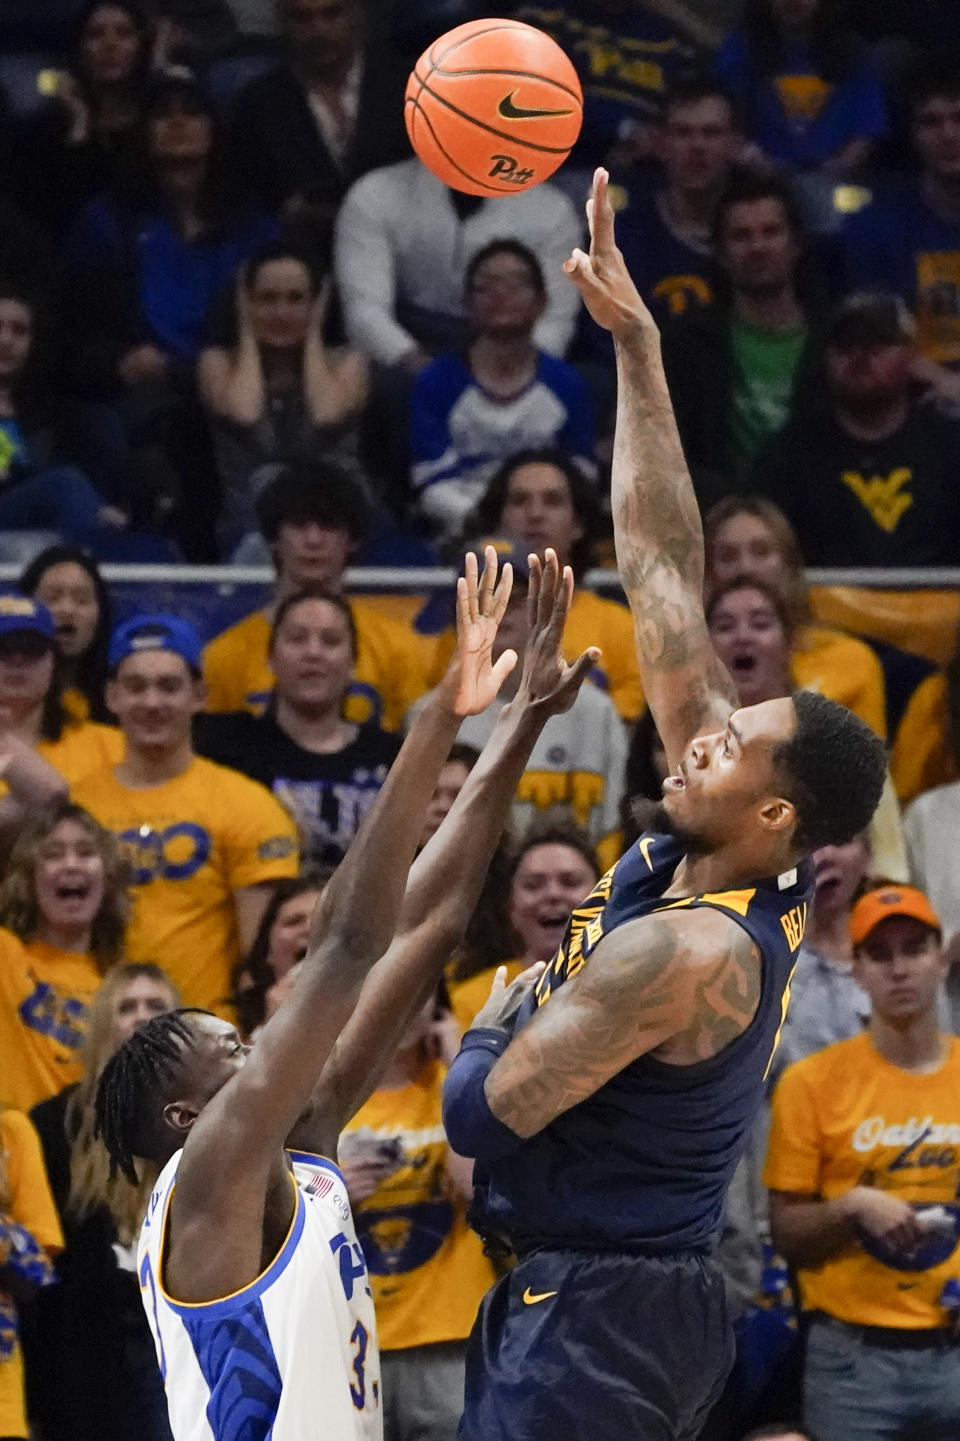 West Virginia's Jimmy Bell Jr., right, shoots over Pittsburgh's Federiko Federiko, left, during the first half of an NCAA college basketball game, Friday, Nov. 11, 2022, in Pittsburgh. (AP Photo/Keith Srakocic)